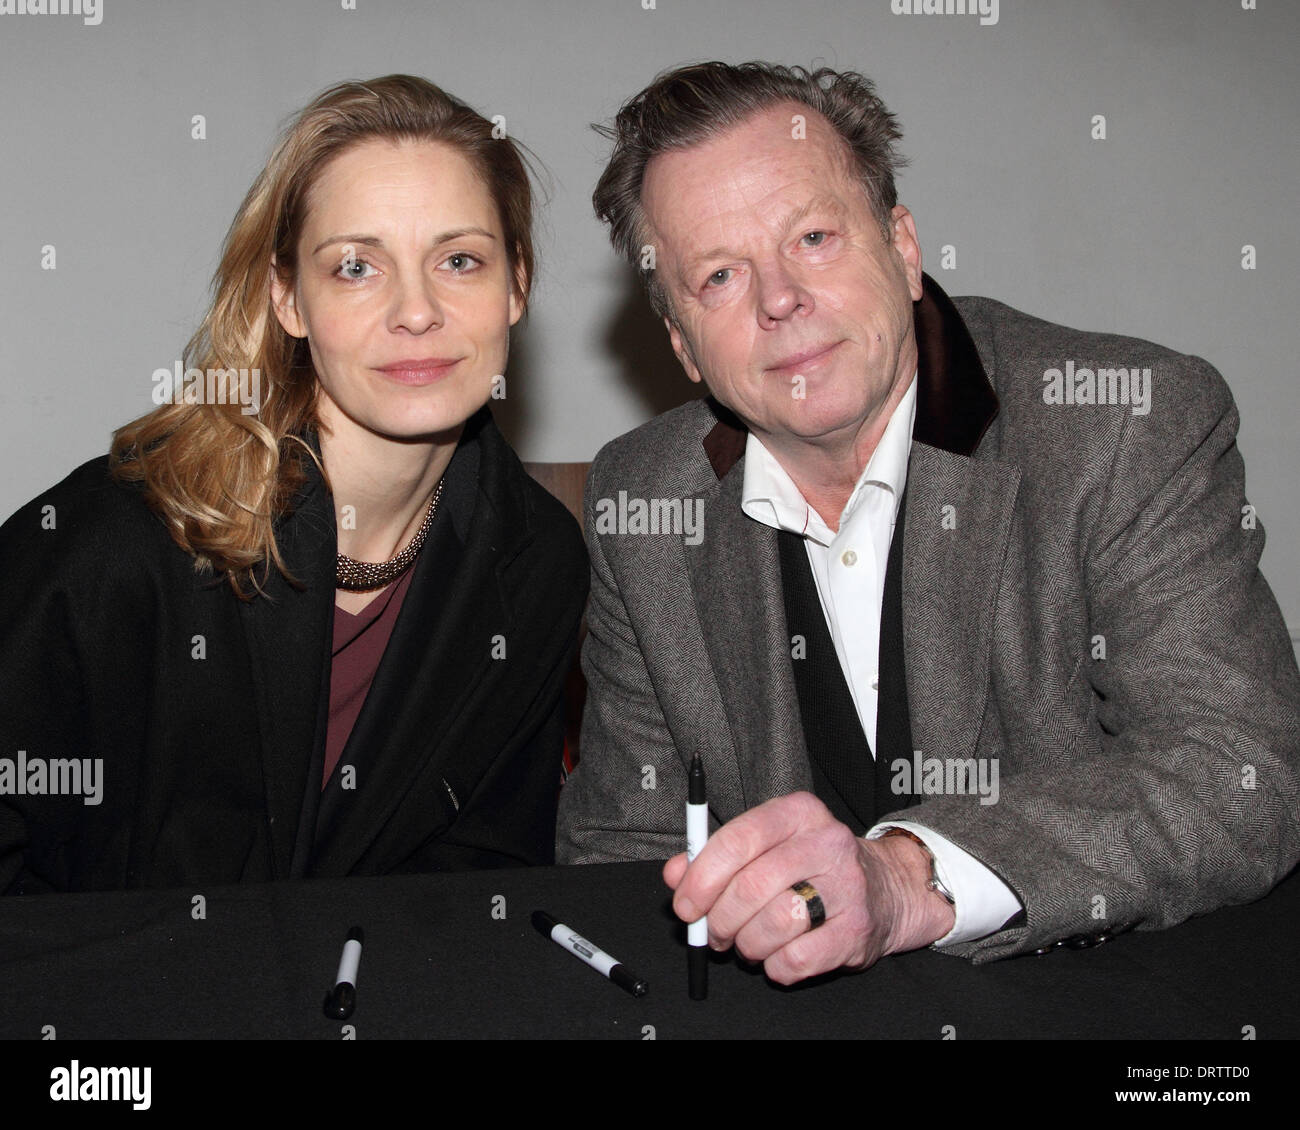 London, UK. 1st Feb, 2014. Krister Henriksson and Charlotta Jonsson at Nordicana 2014 at Old Truman Brewery, London on February 1st 2014  Photo by Keith Mayhew Credit:  KEITH MAYHEW/Alamy Live News Stock Photo